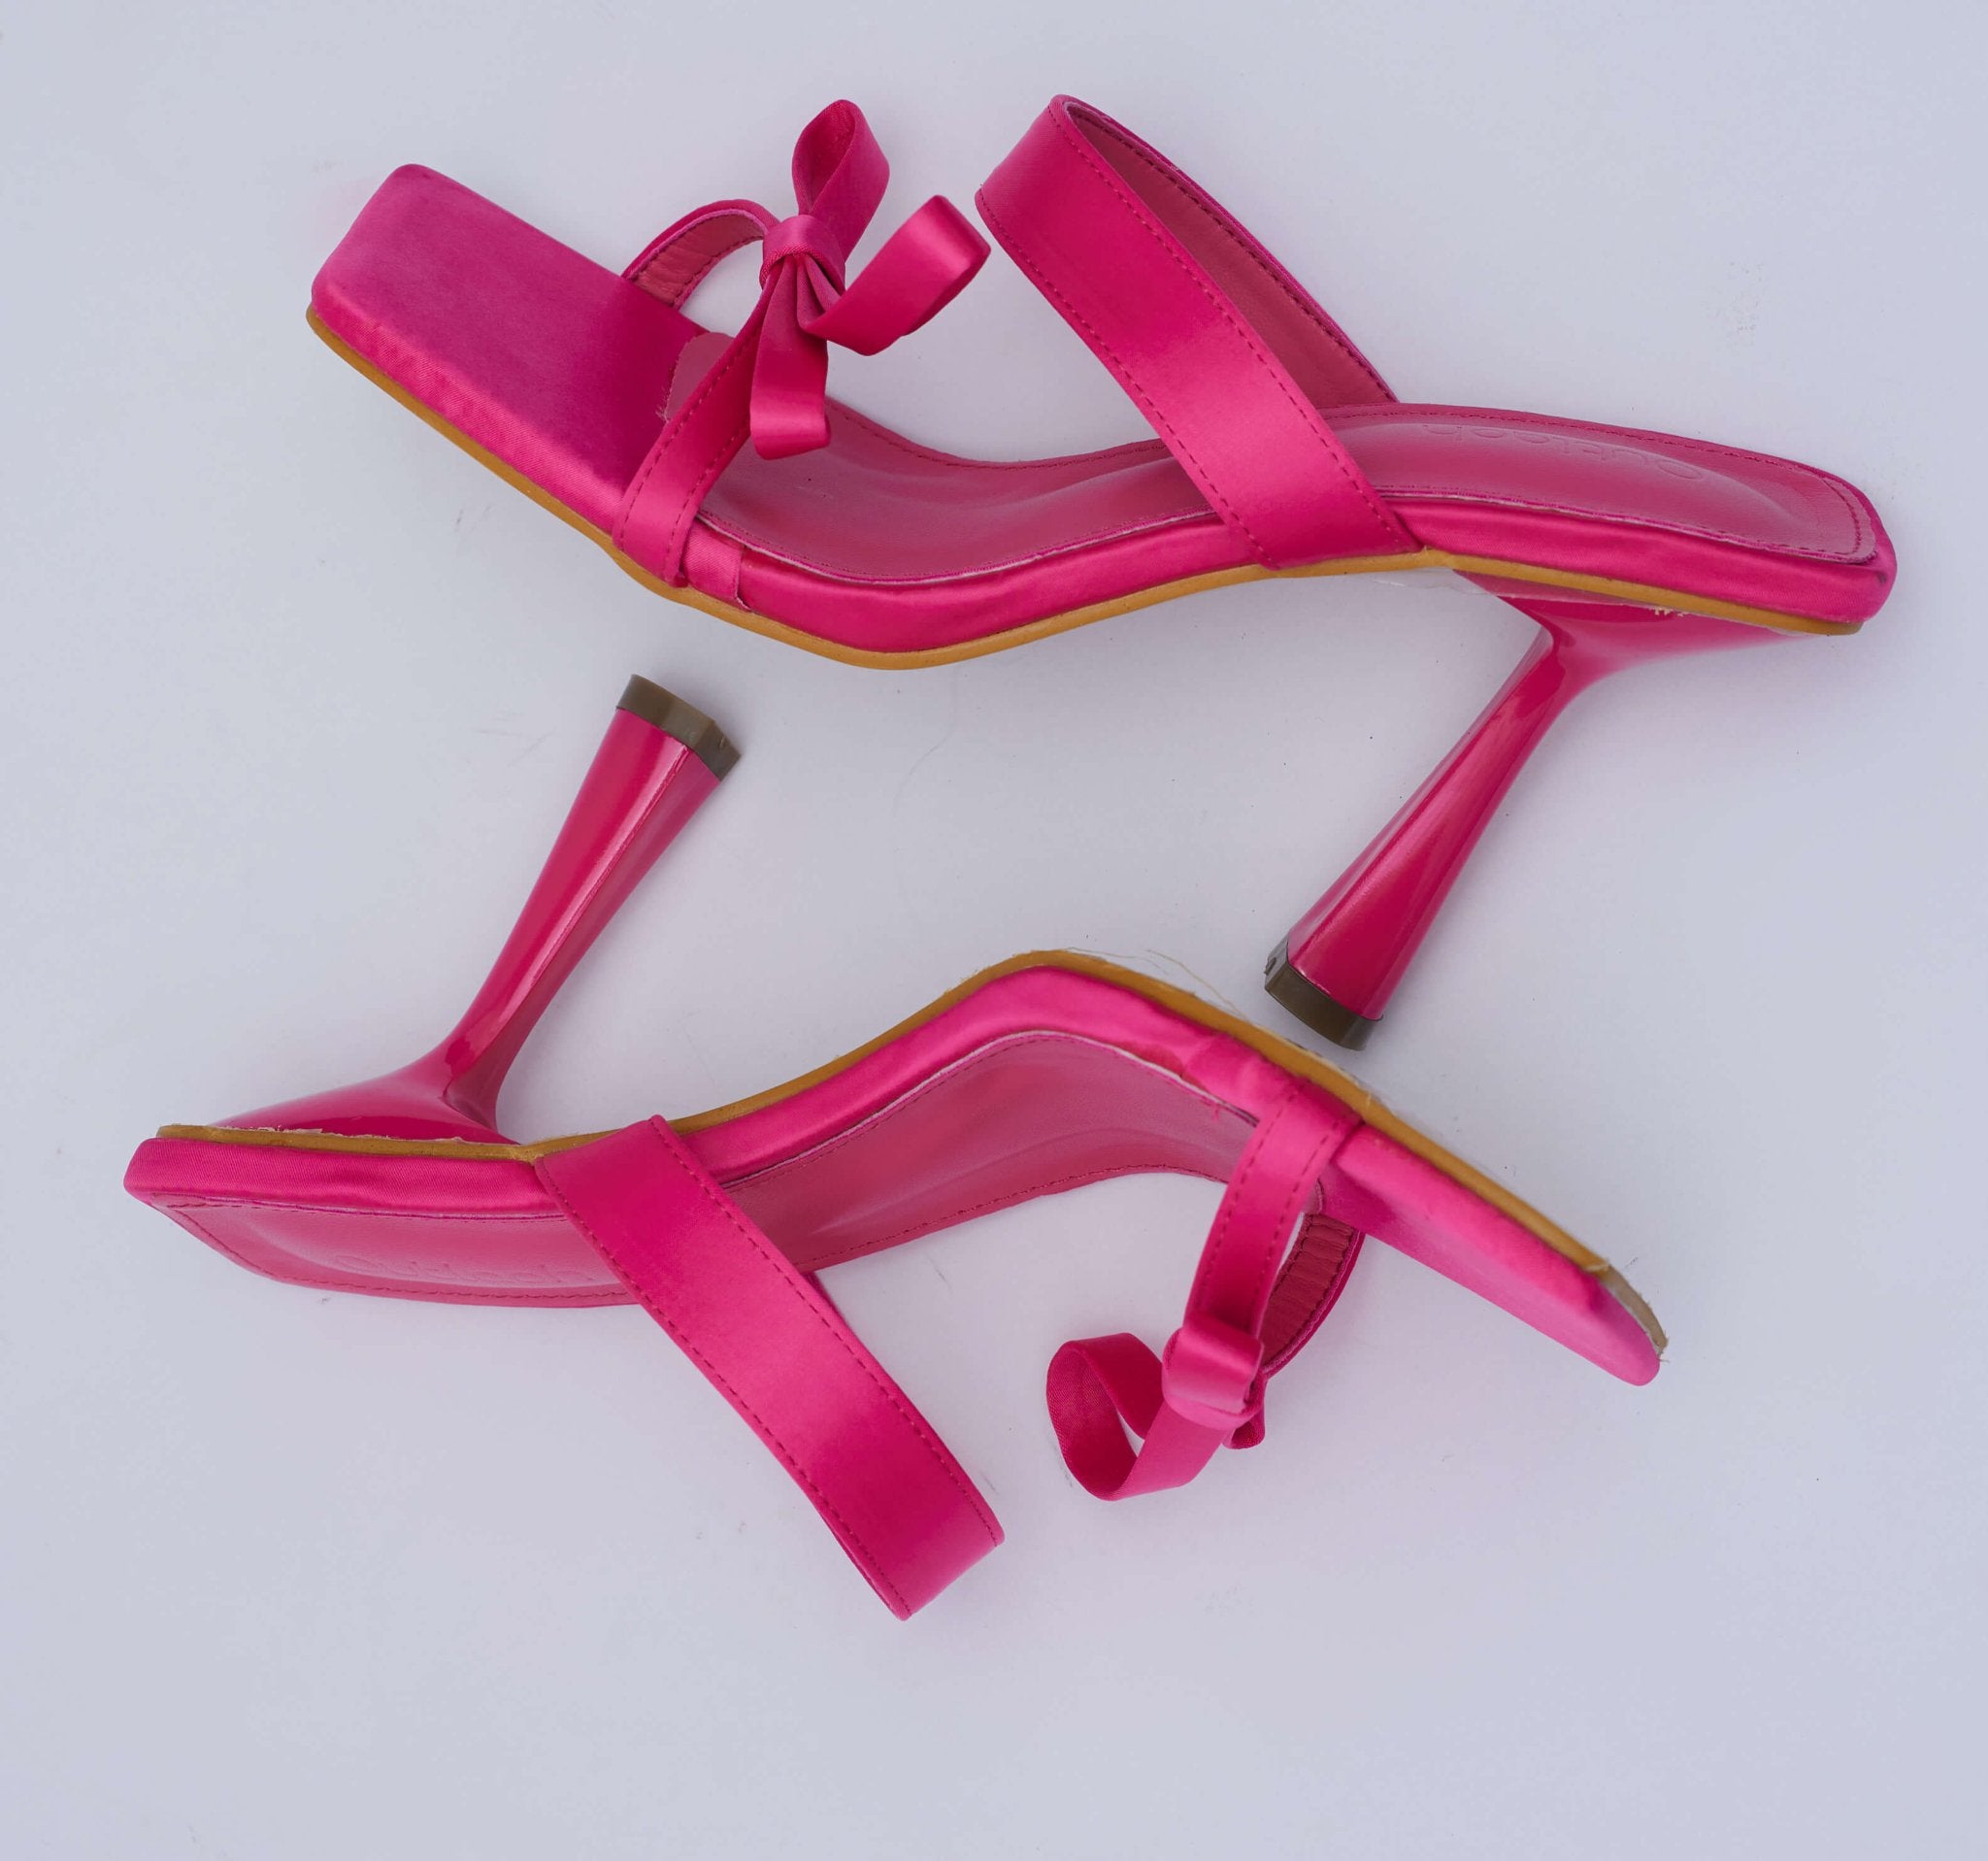 ACE HEELS in FUSHISIA PINK - Outlash brand